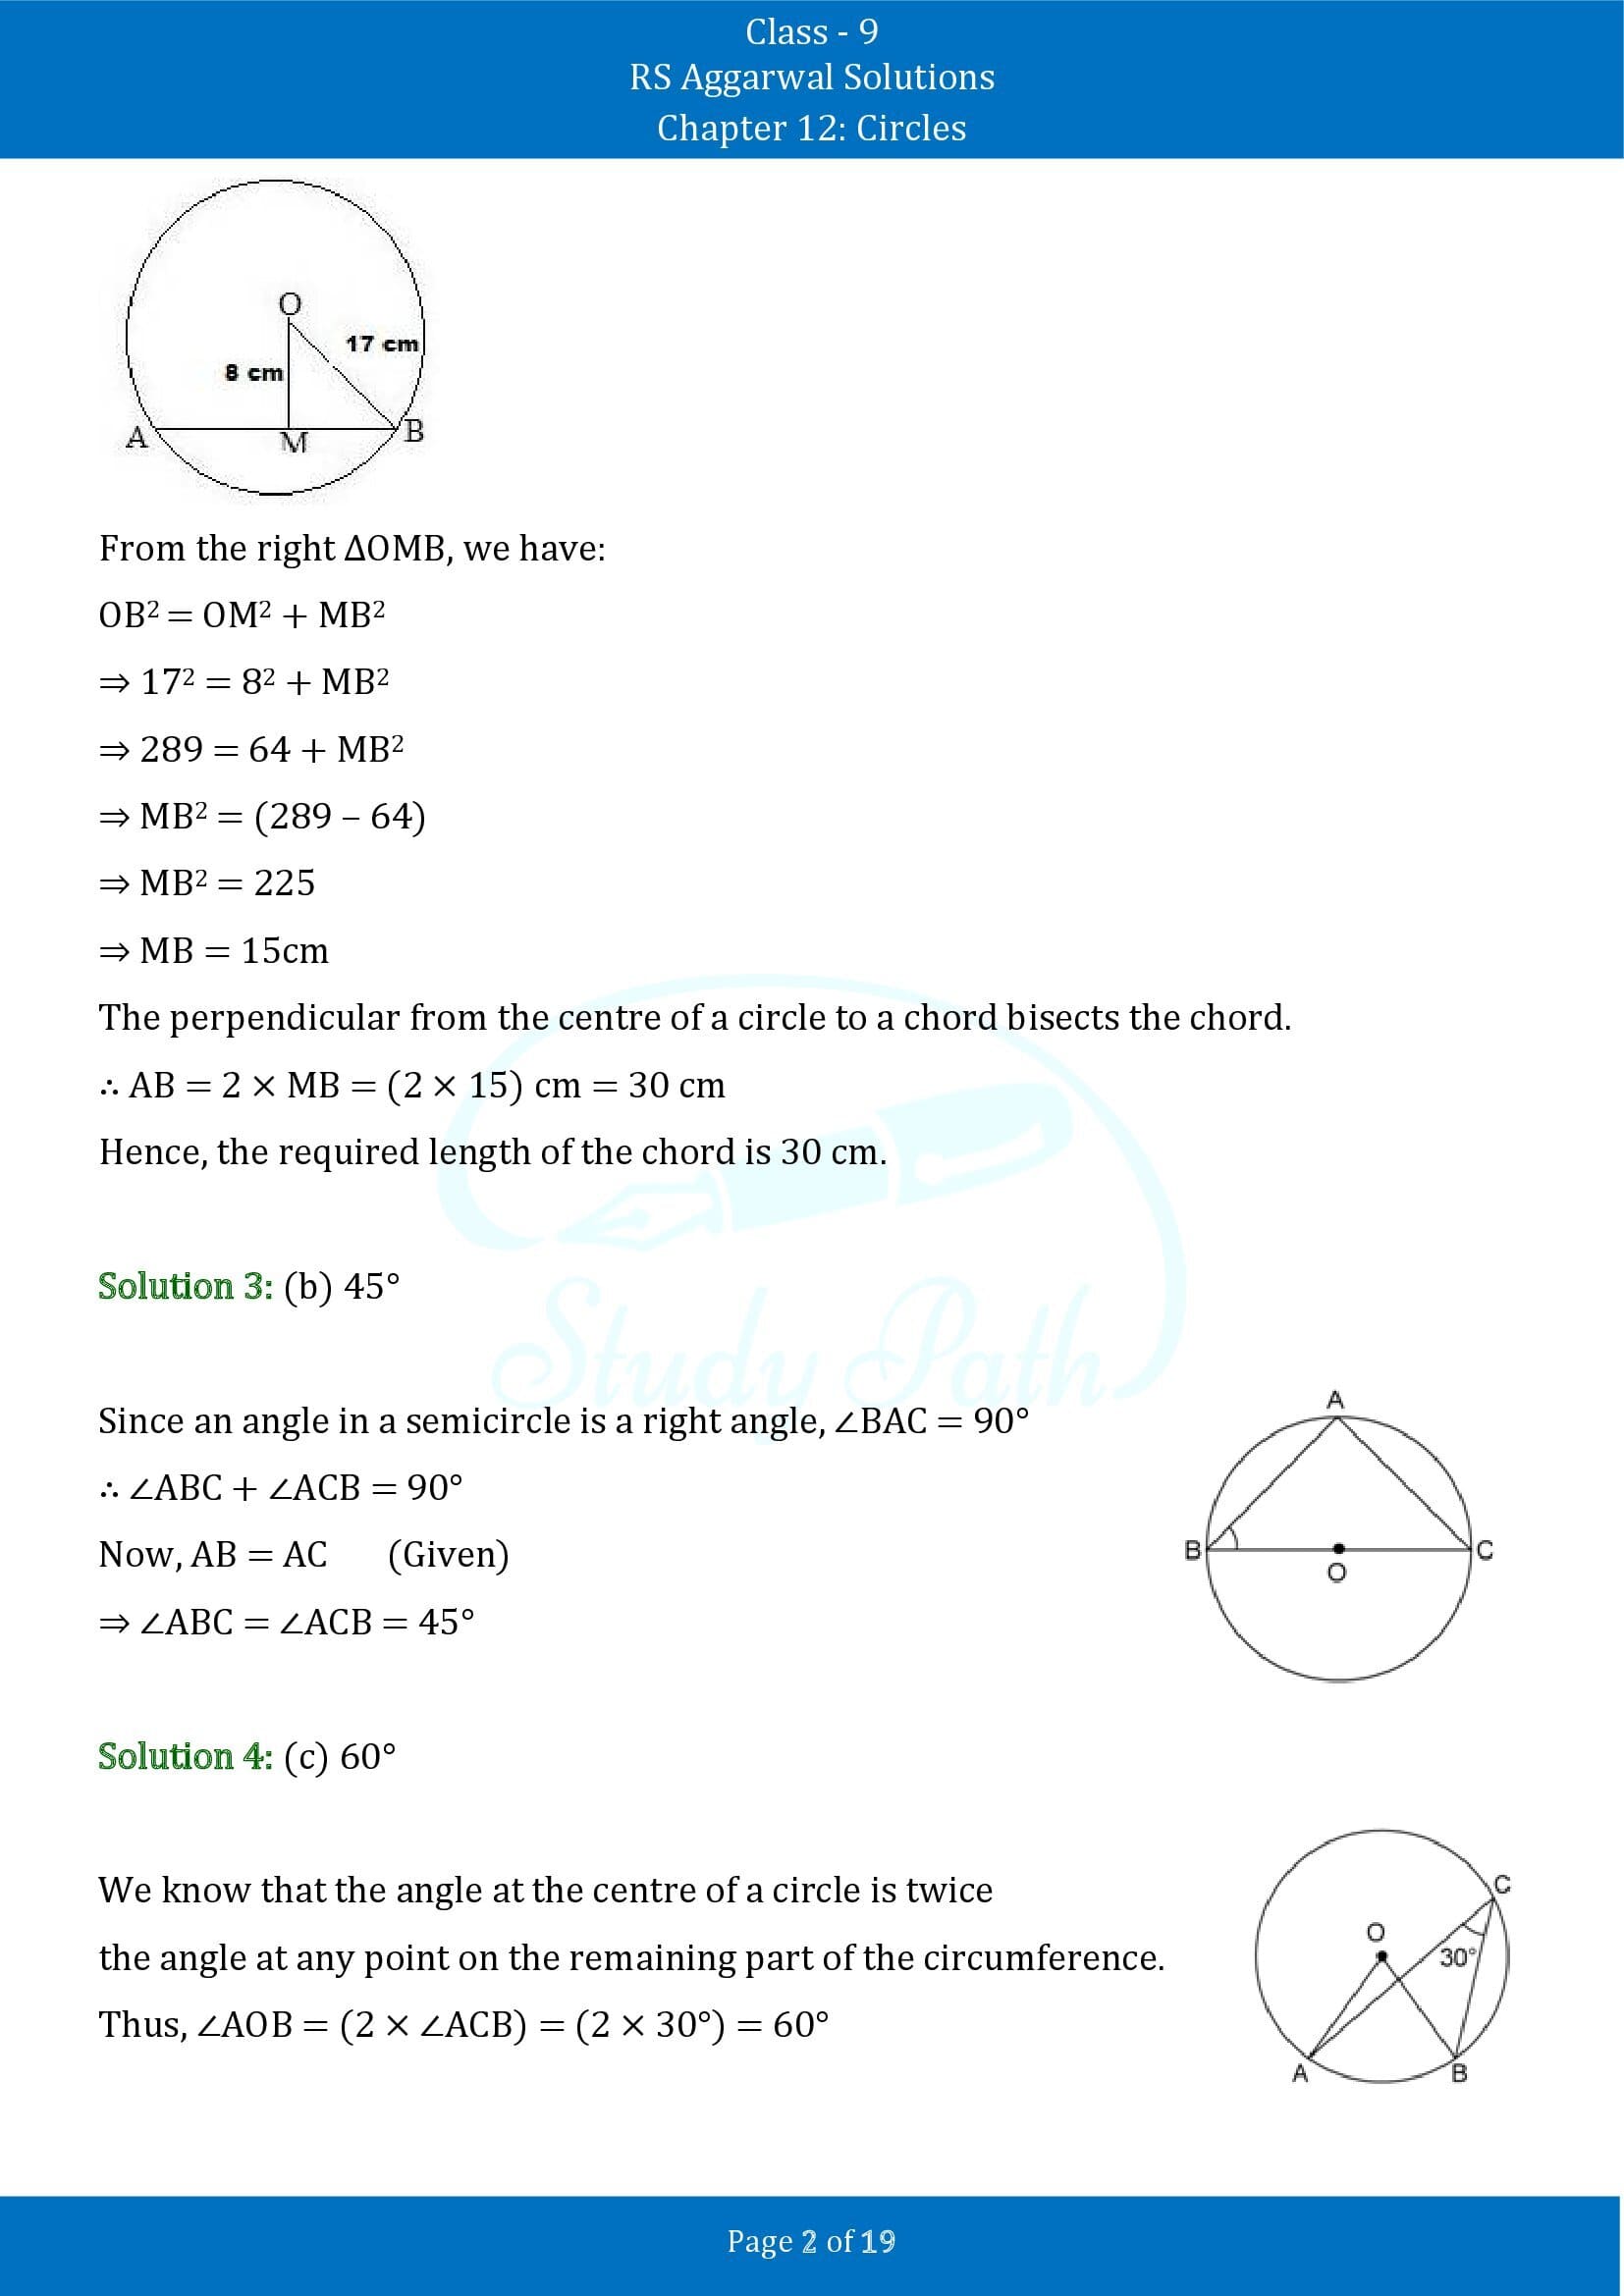 RS Aggarwal Solutions Class 9 Chapter 12 Circles Multiple Choice Questions MCQs 00002